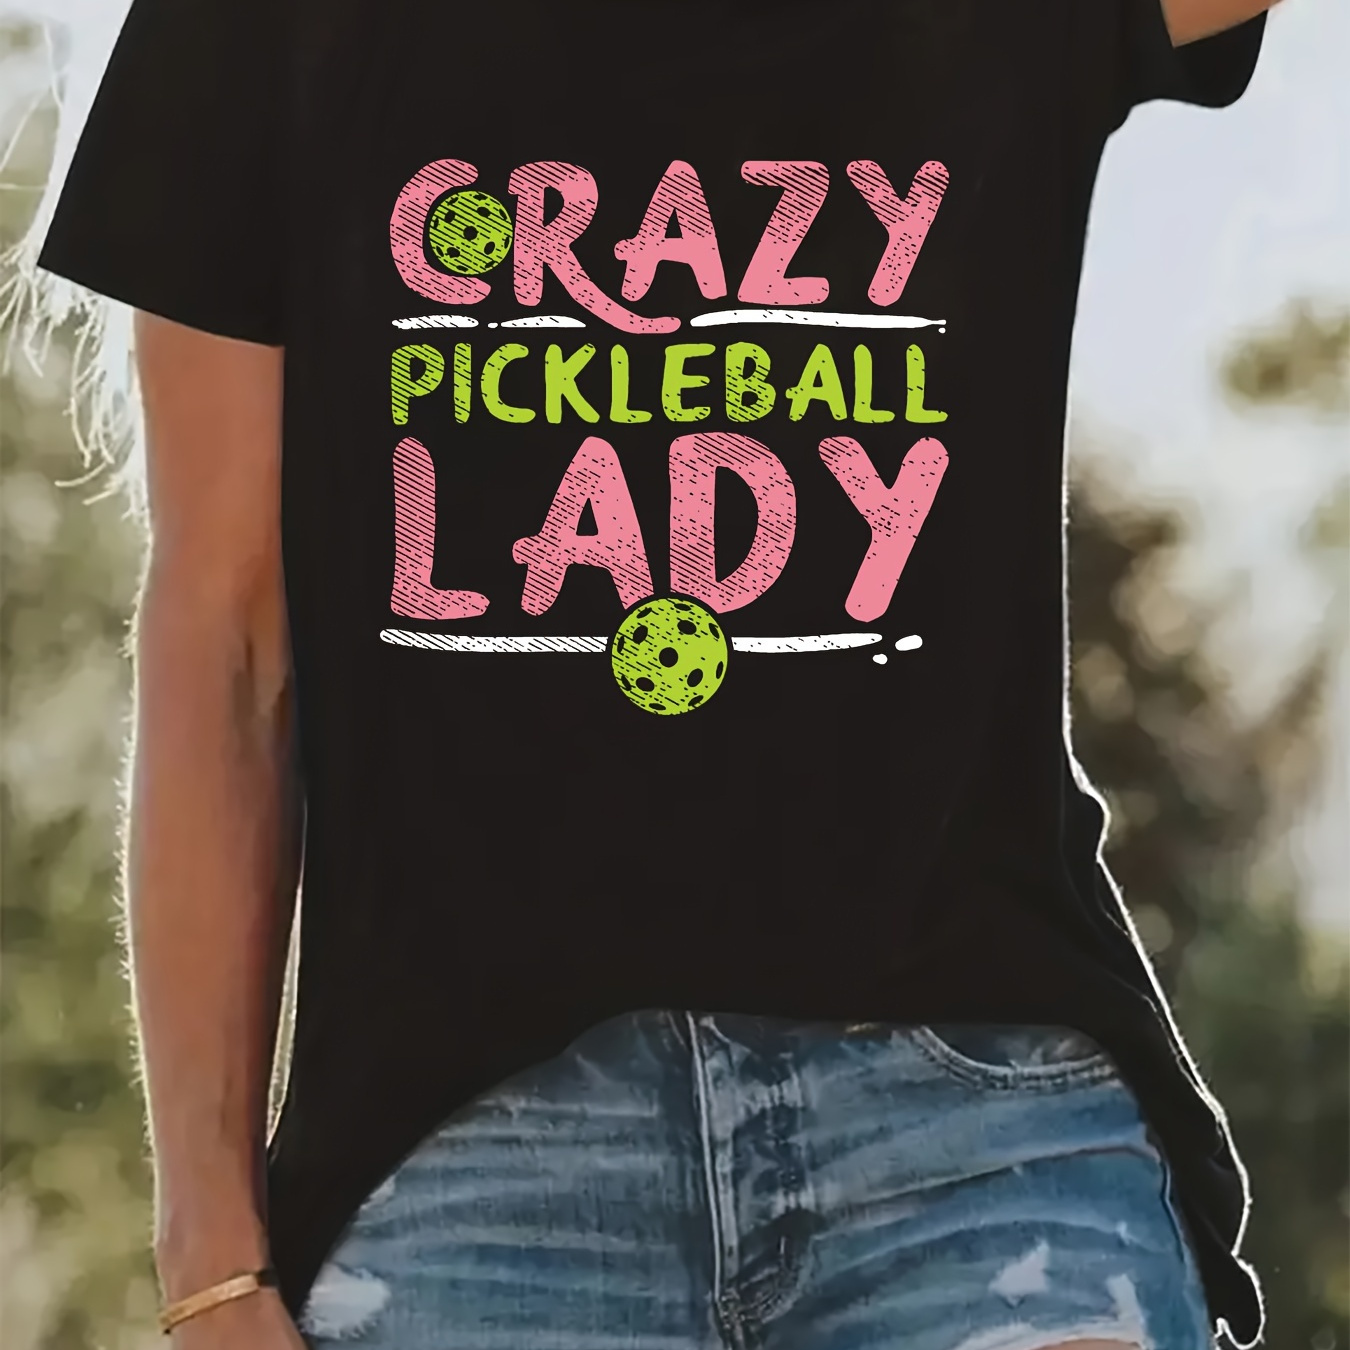 

Crazy Pickleball Lady Print T-shirt, Casual Crew Neck Short Sleeve Top For Spring & Summer, Women's Clothing